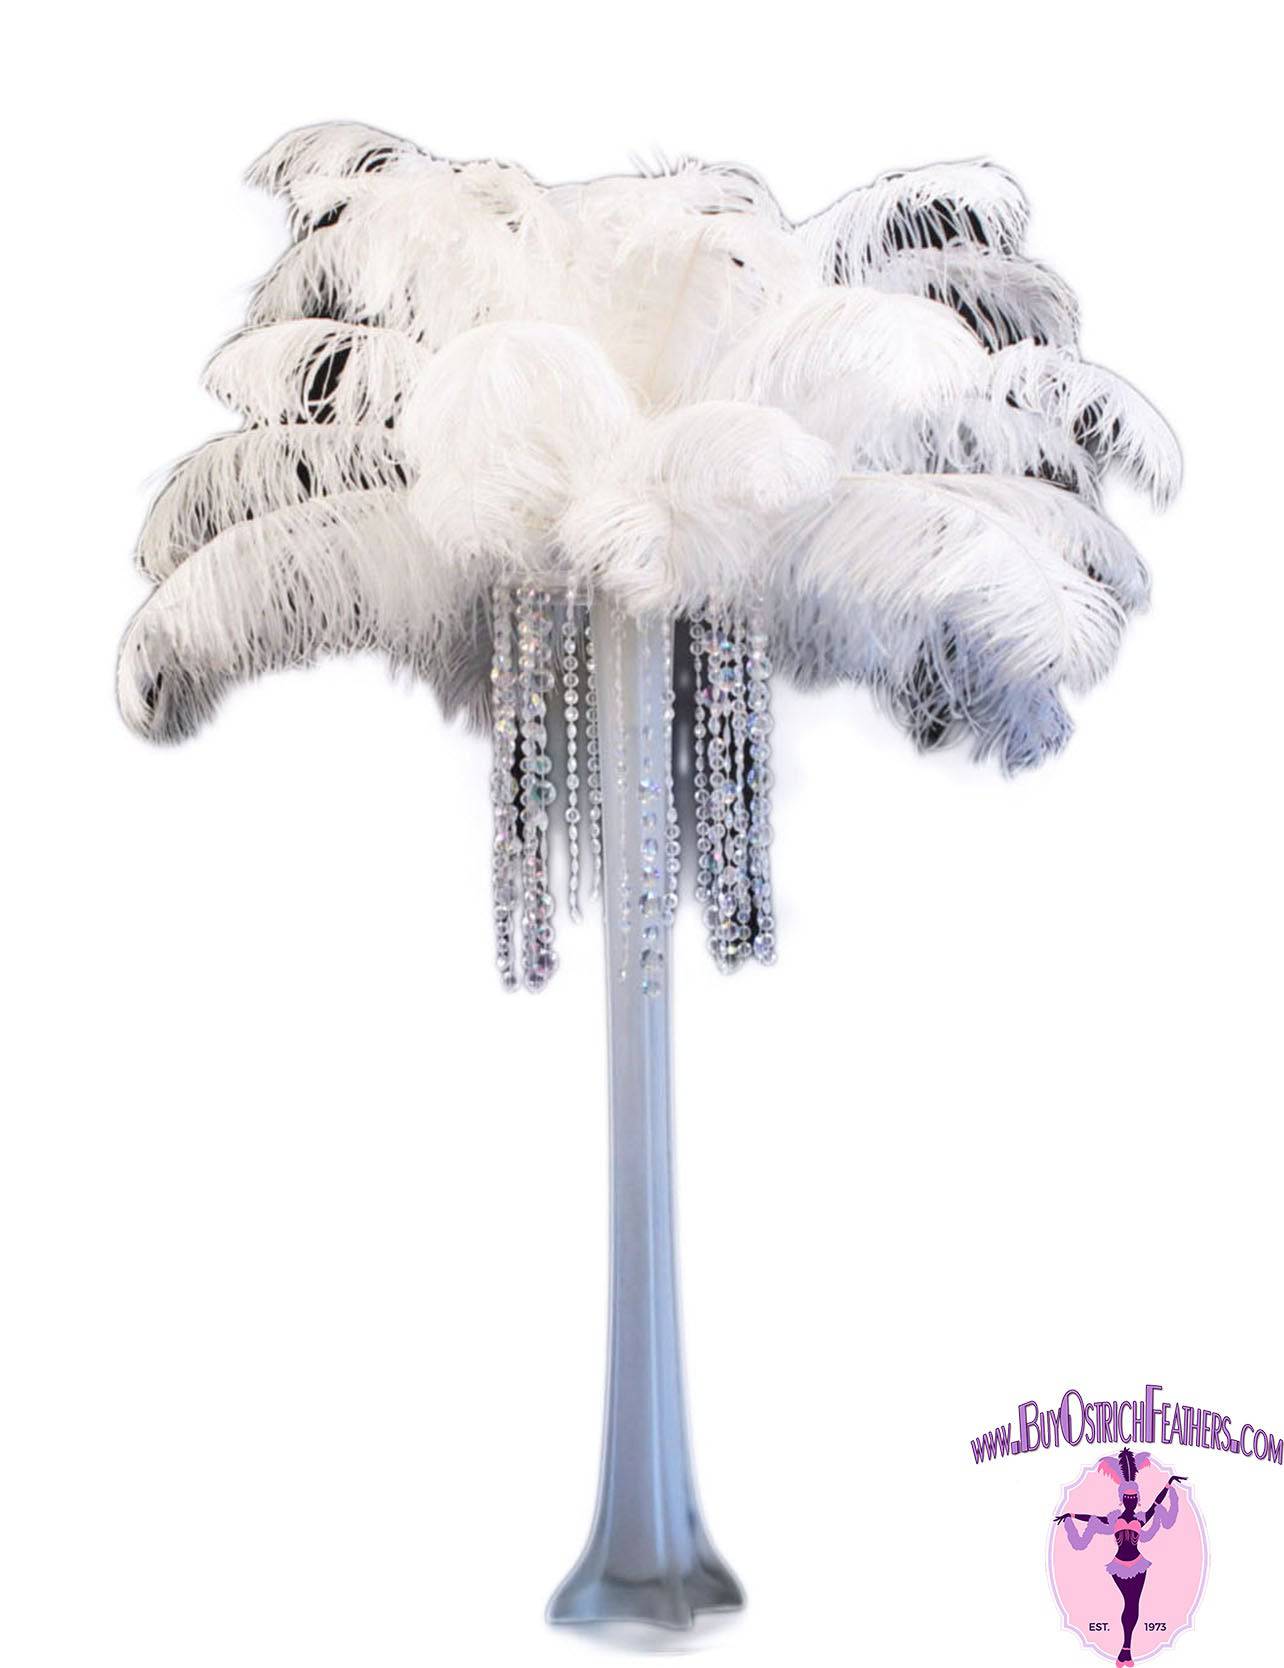 
                  
                    Ostrich Feather Tail Plumes 15-18" (White) - Buy Ostrich Feathers
                  
                